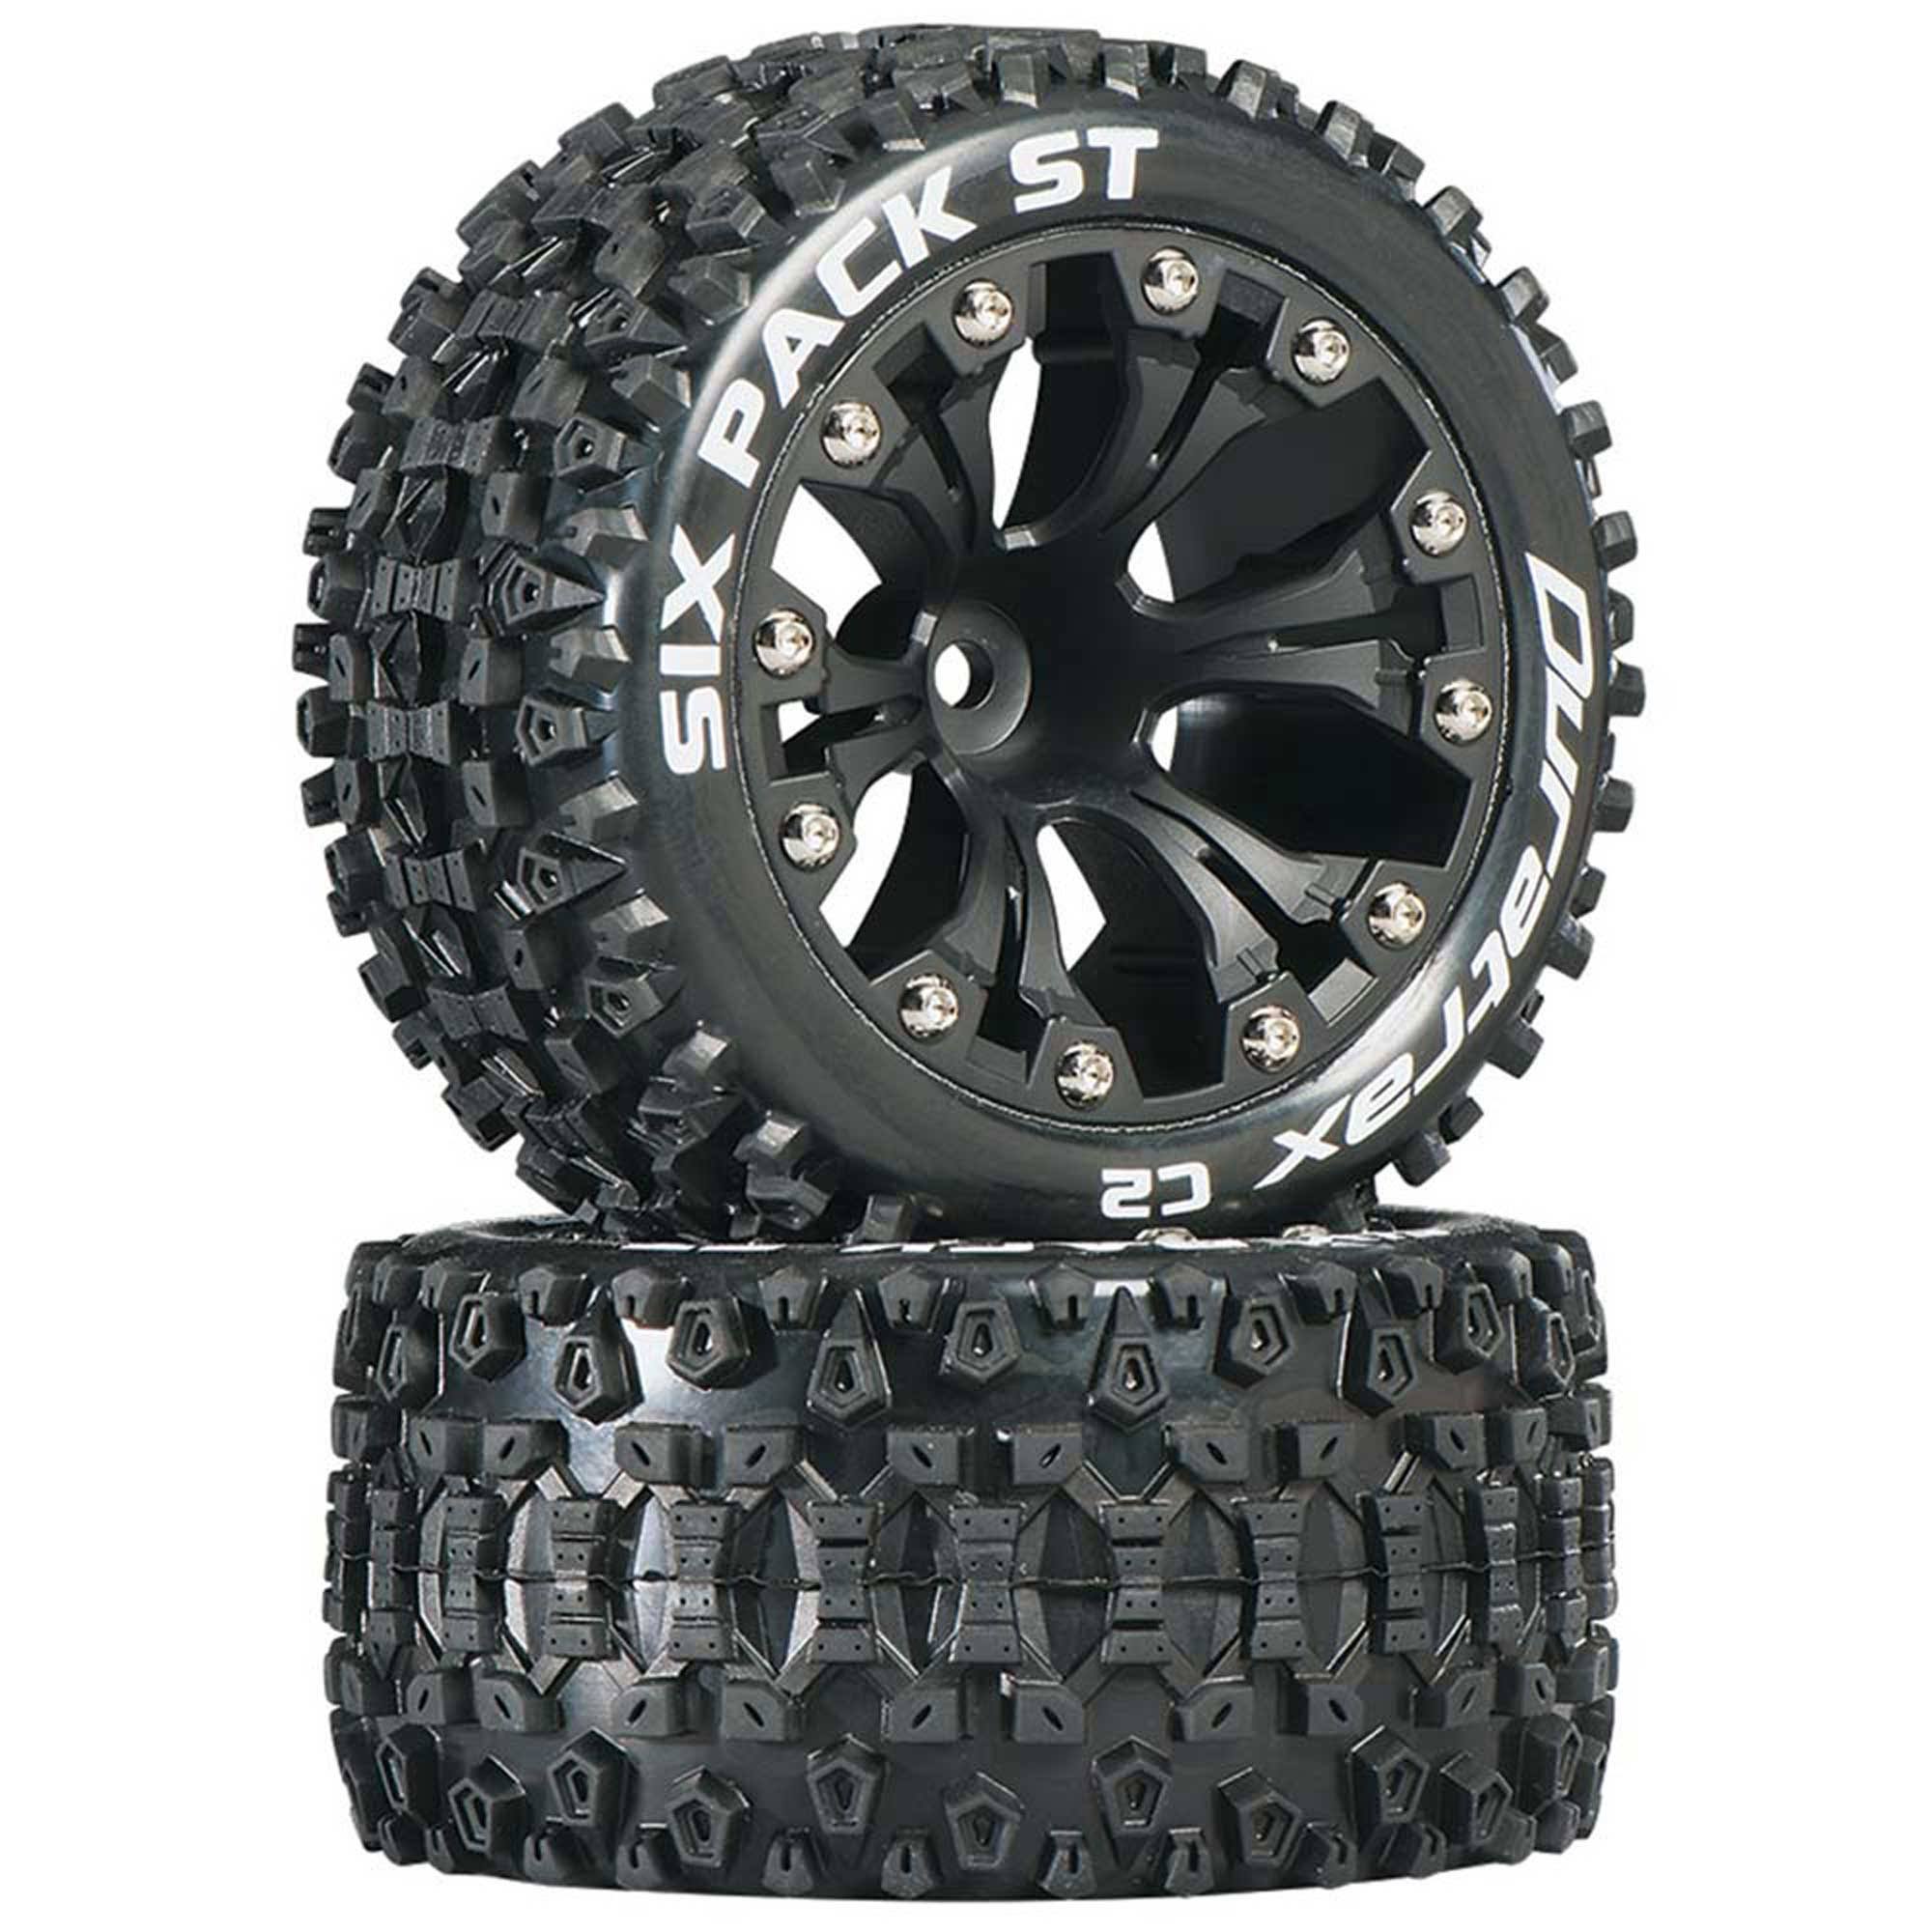 Duratrax Sixpack St 2.8 Mounted Truck Tires - Offset Black